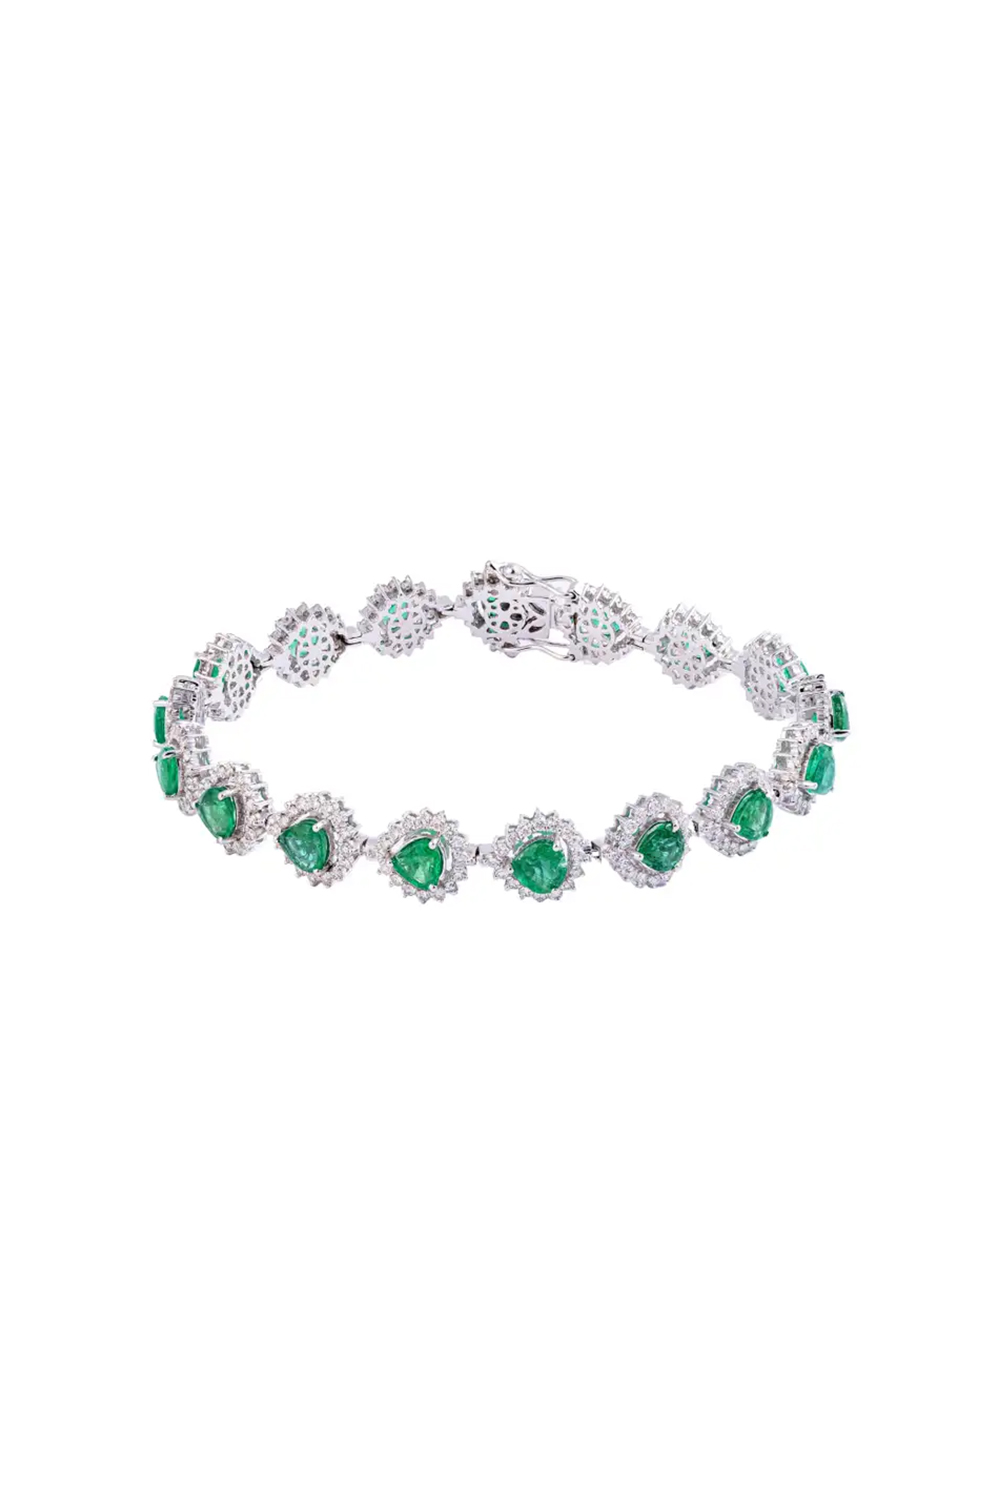 7.42cts Zambian Emerald Tennis Bracelet with 3.00cts Diamonds and 14k Gold